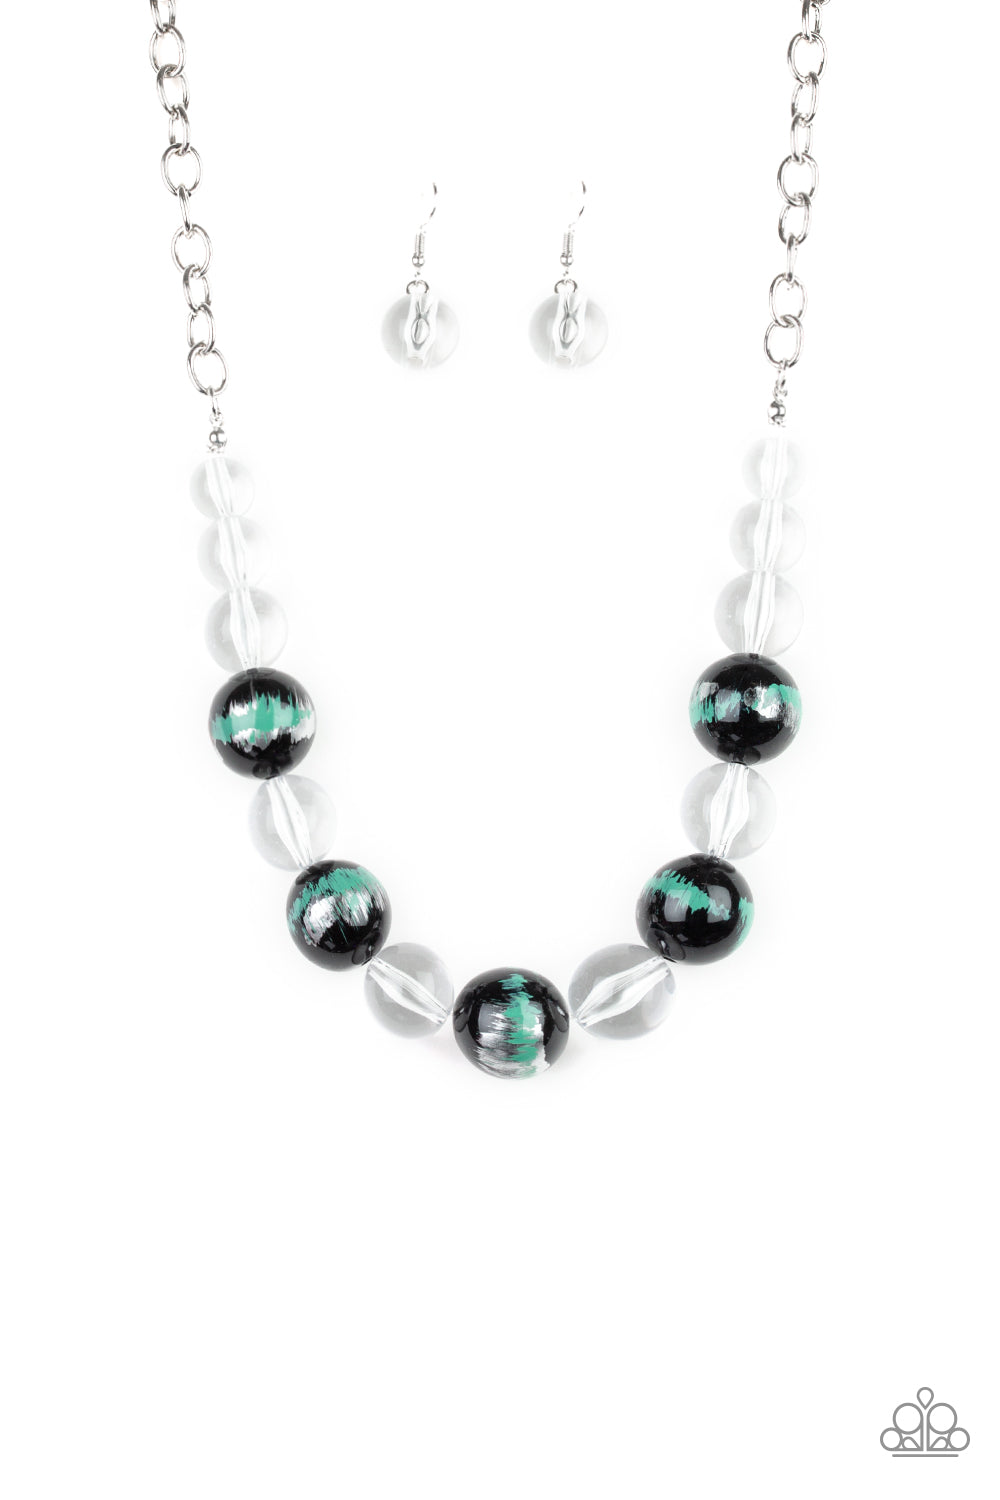 A collection of shiny black and glassy clear beads are threaded along an invisible wire below the collar. The black beads are splashed in hints of refreshing green and shiny metallic paint for a colorful finish. Features an adjustable clasp closure.